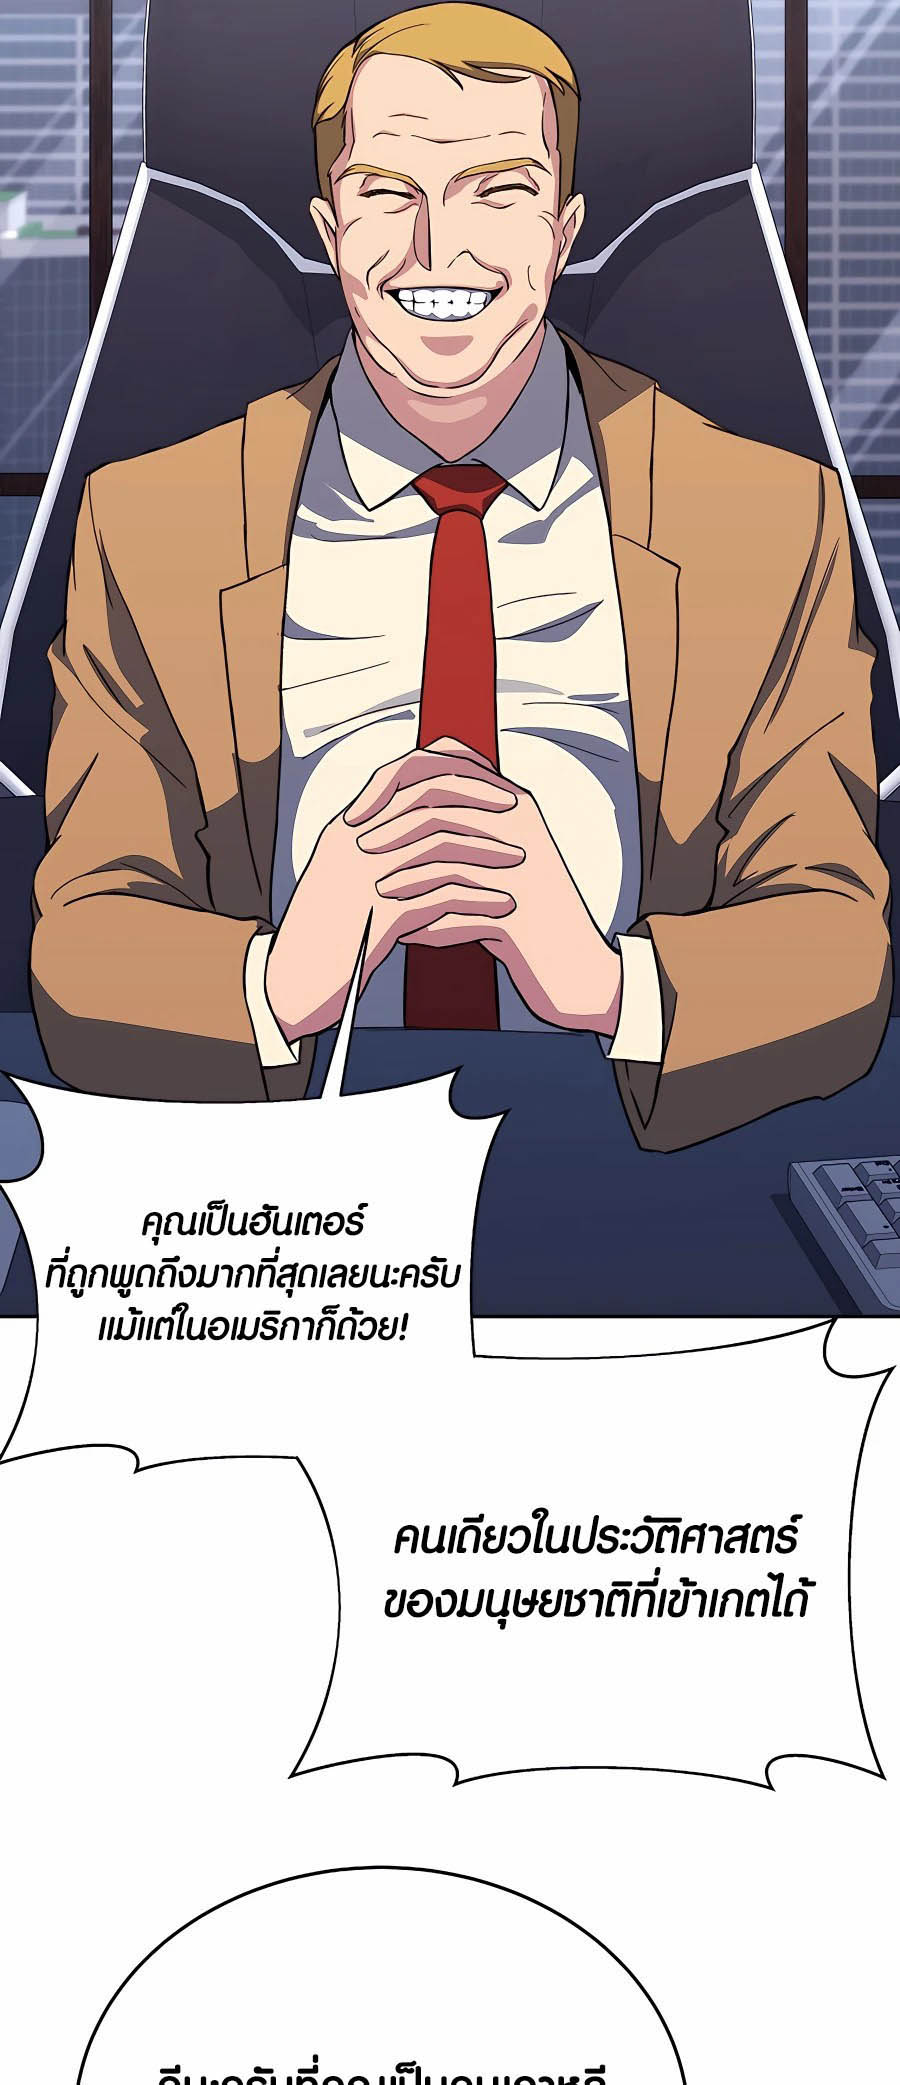 à¸­à¹ˆà¸²à¸™à¸¡à¸±à¸™à¸®à¸§à¸² à¹€à¸£à¸·à¹ˆà¸­à¸‡ The Part Time Land of the Gods 56 16